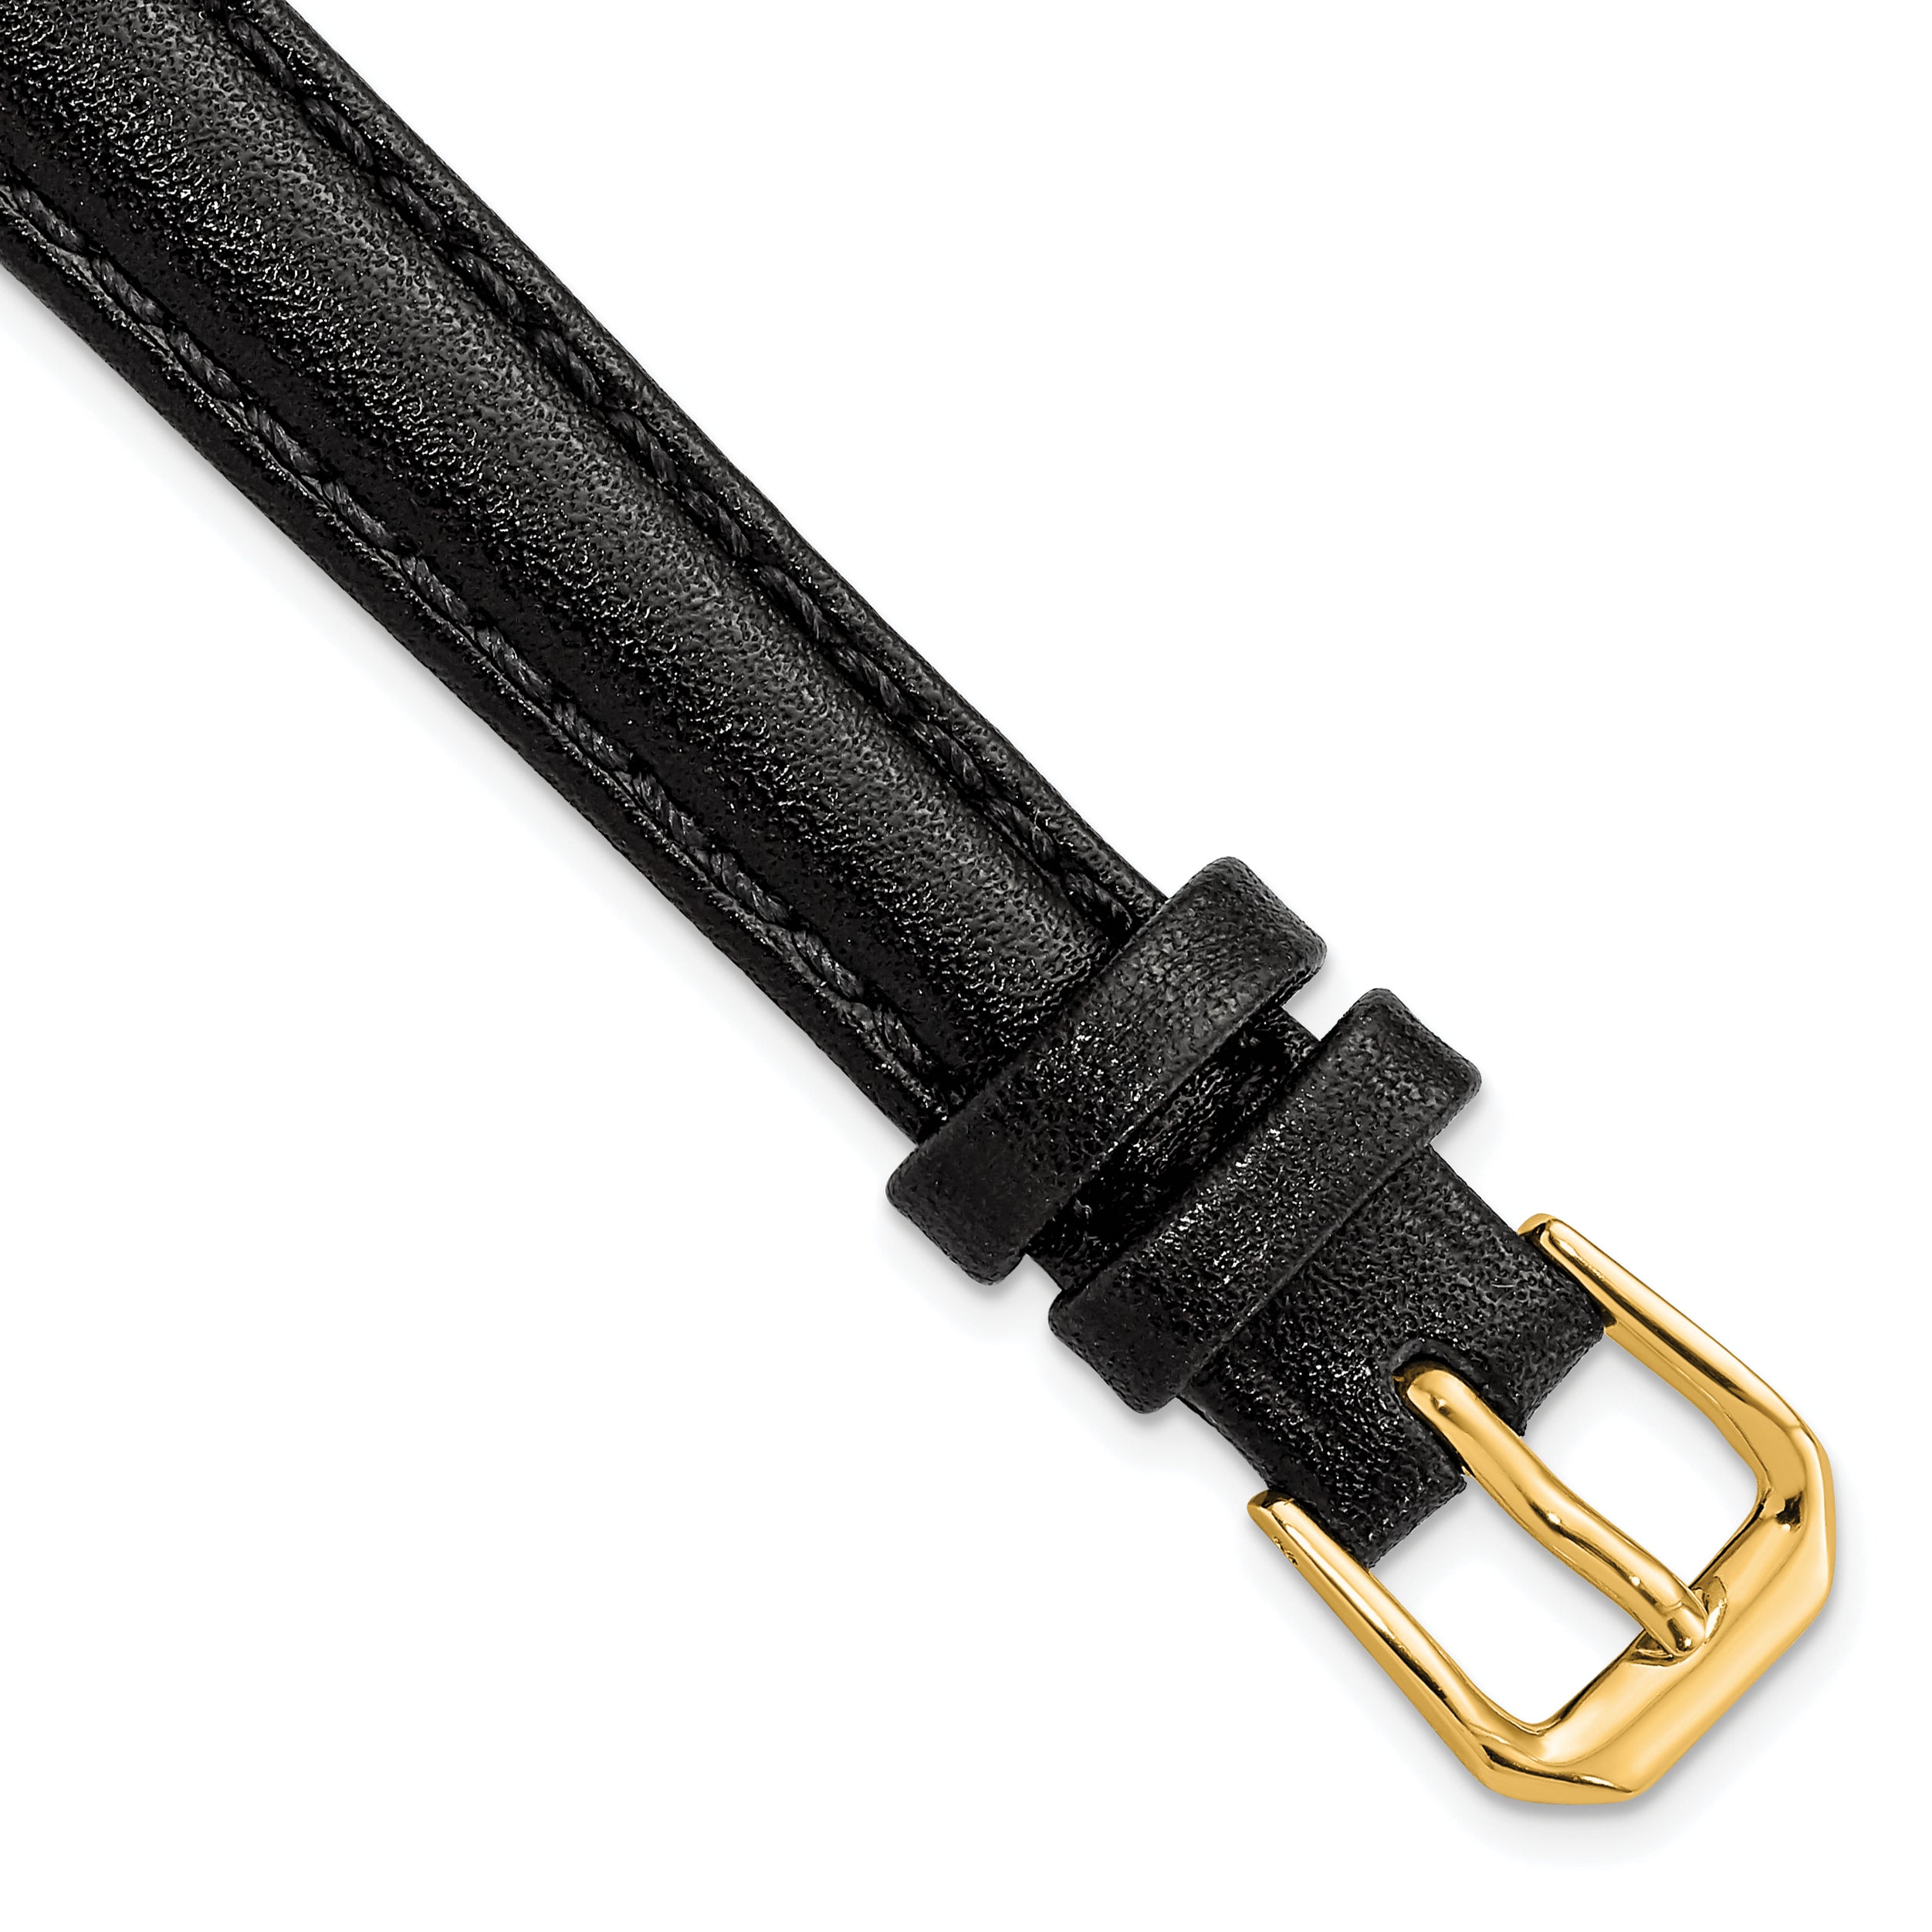 DeBeer 12mm Black Long Smooth Leather with Gold-tone Buckle 7.5 inch Watch Band